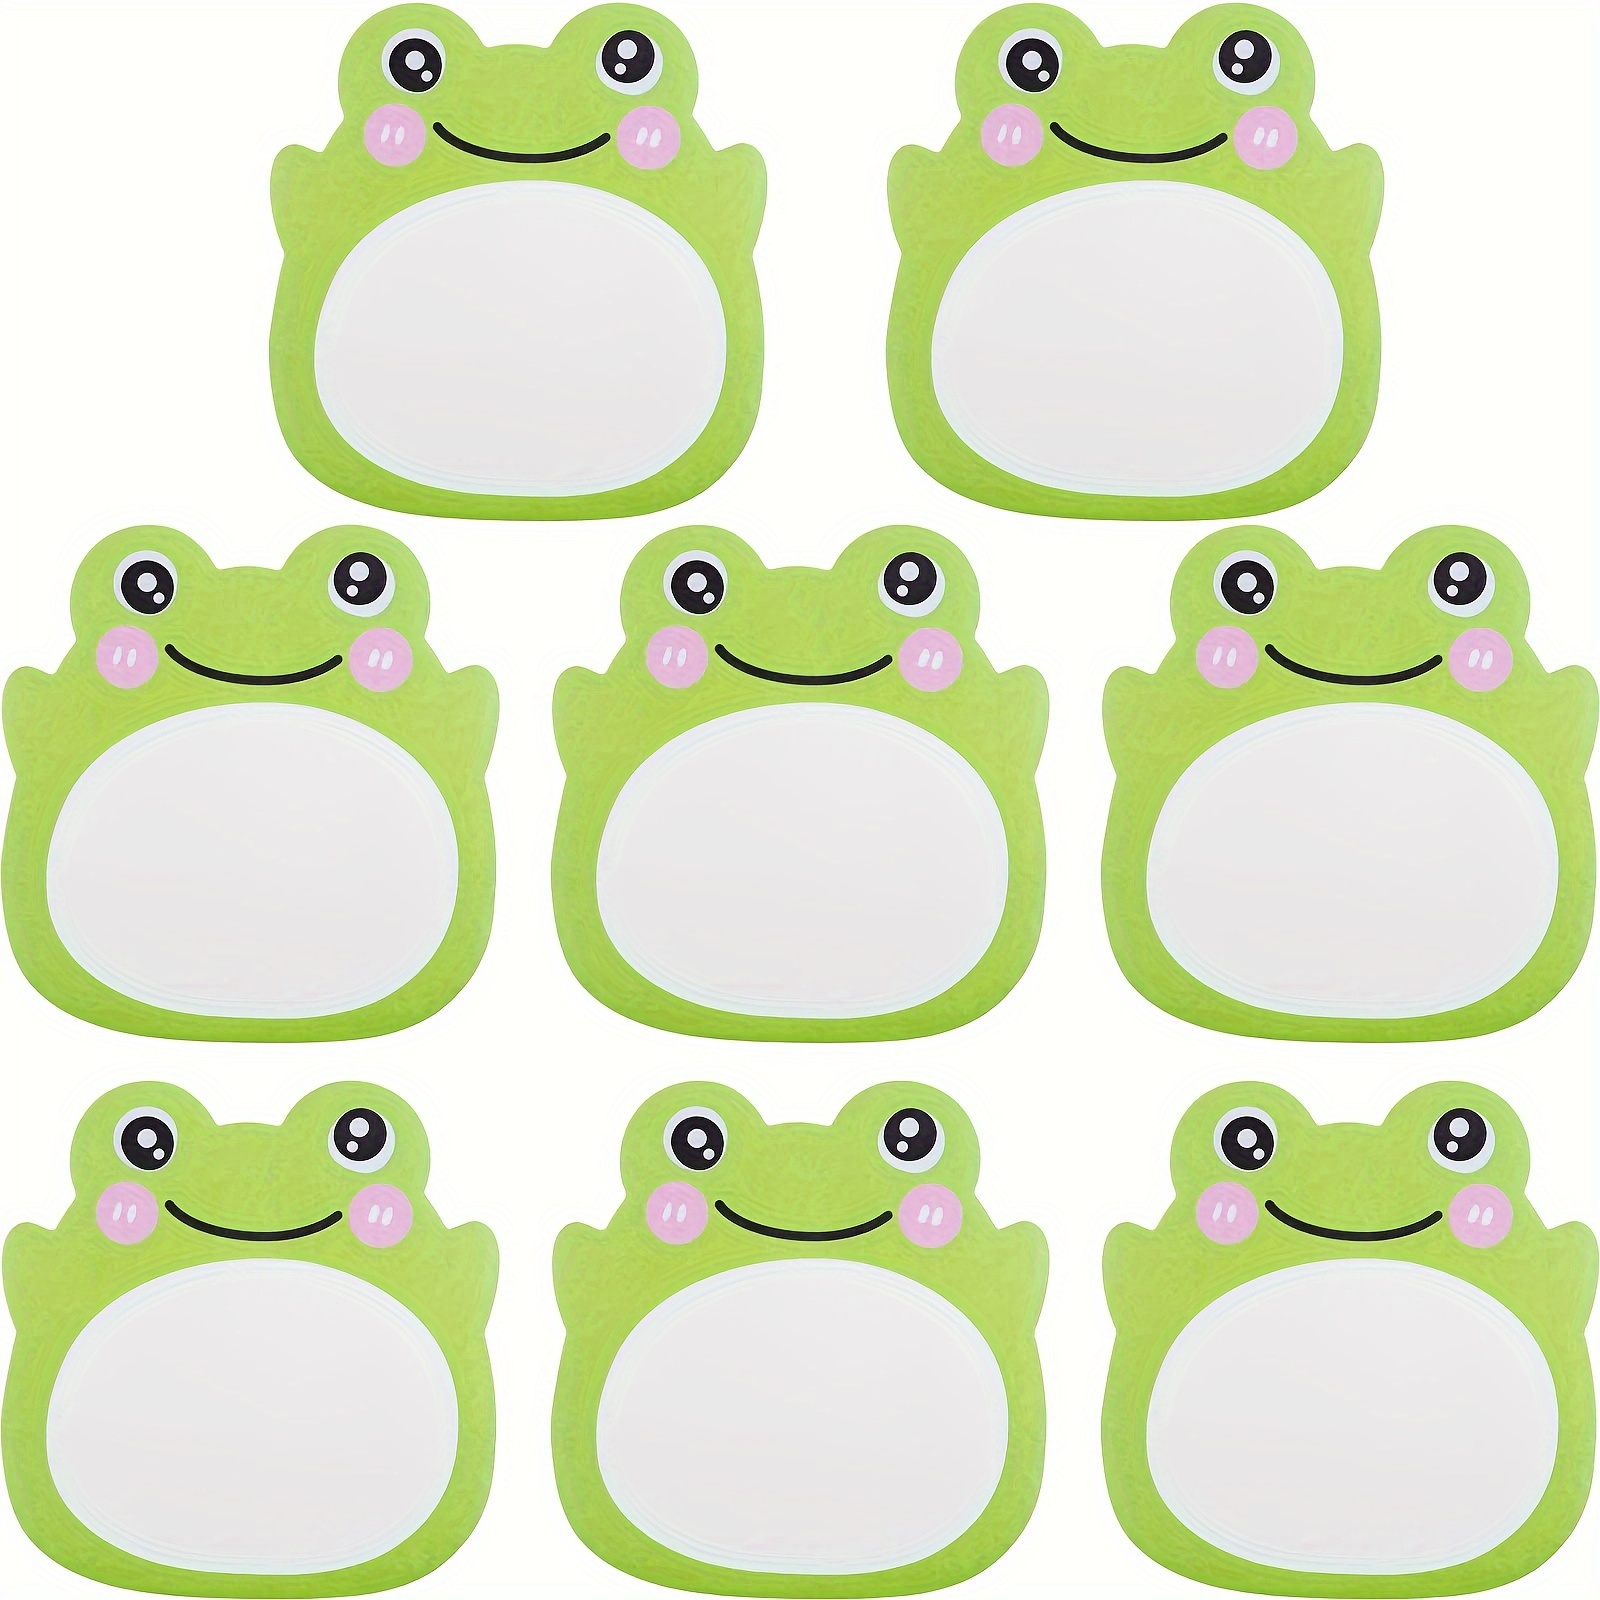 

8pcs Frog Sticky Notes Kawaii Frogs Sticky Notes Sets, Aesthetic Cute Small Frog Sticky Notes Mini Animal Self-stick Notes Pads For Frog Lovers Office School Creative Gifts